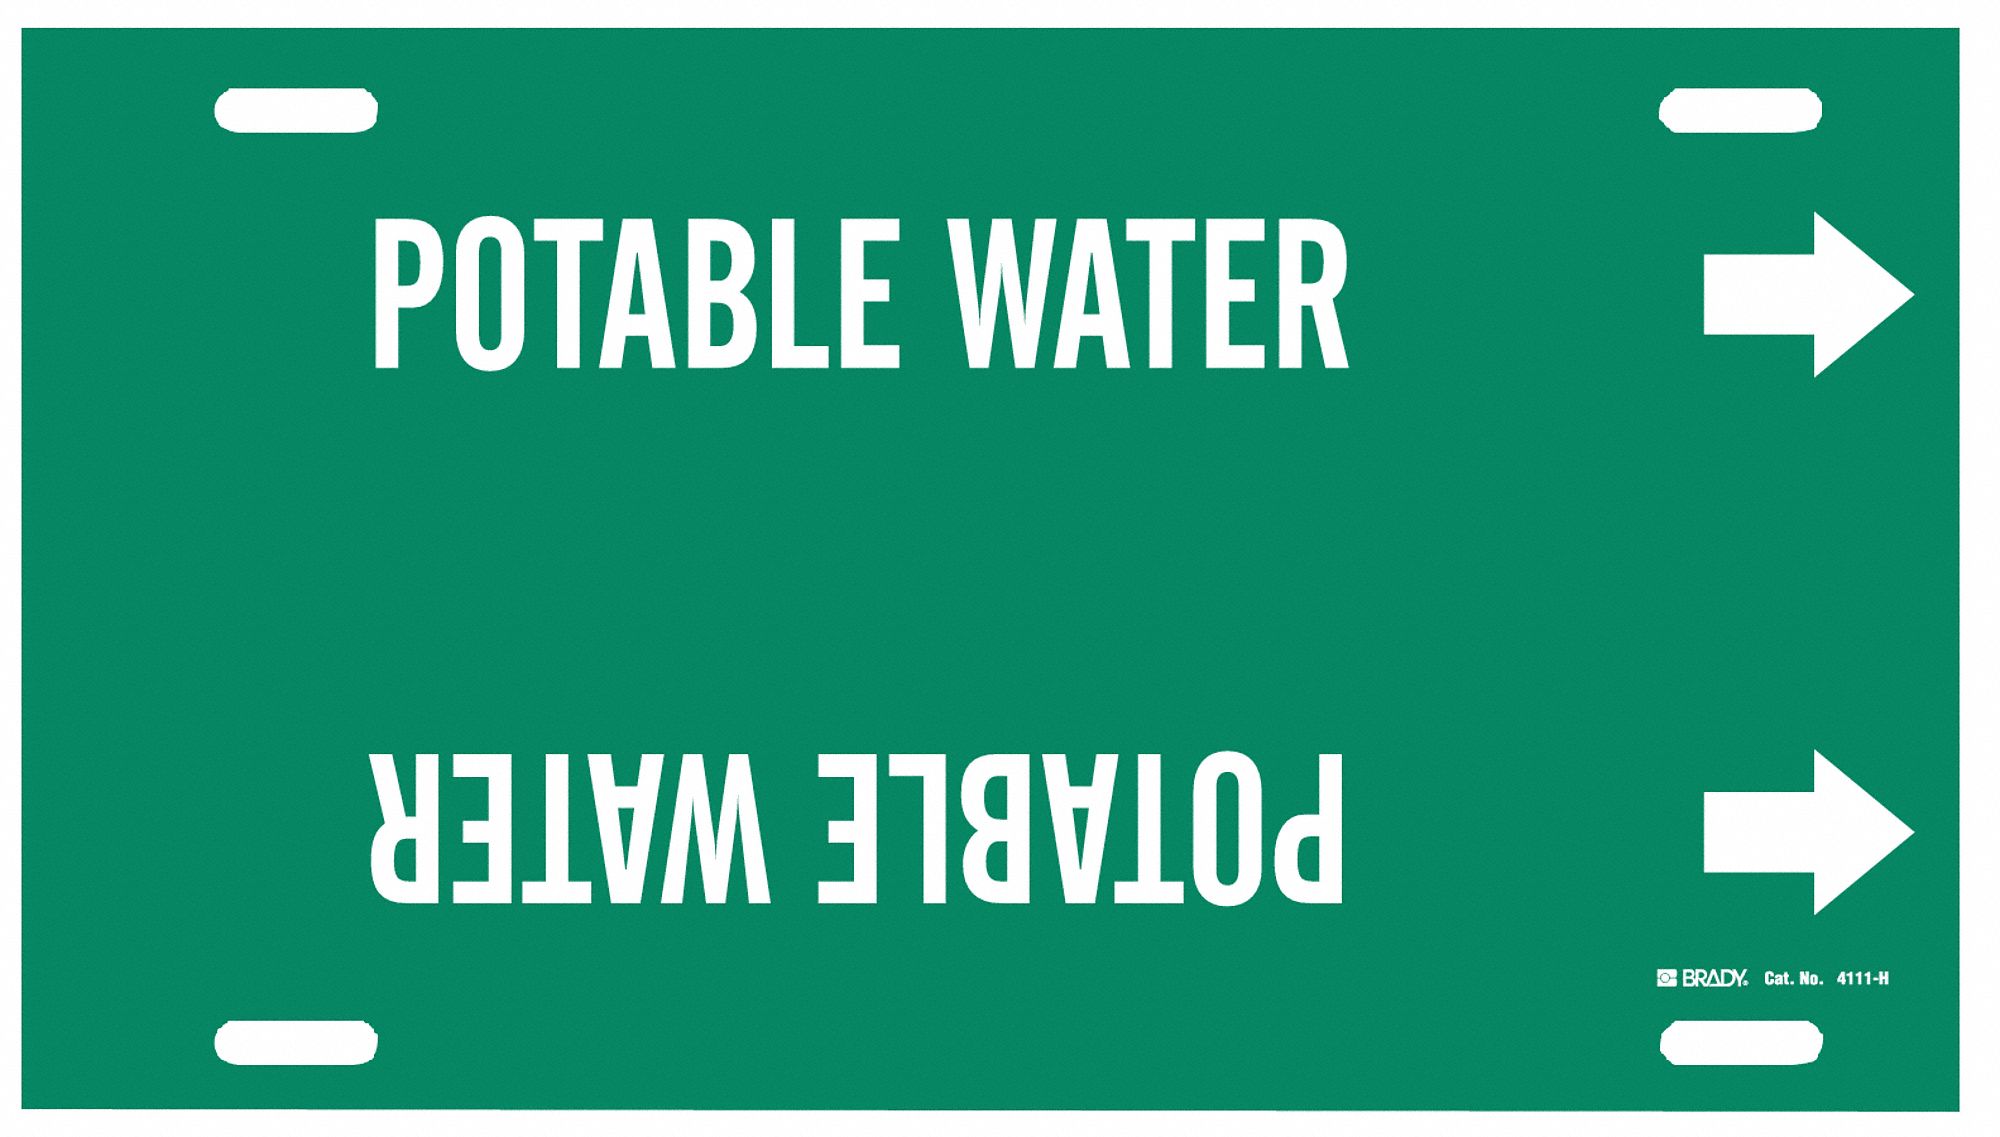 Pipe Marker,Potable Water,Grn,10 to15 In